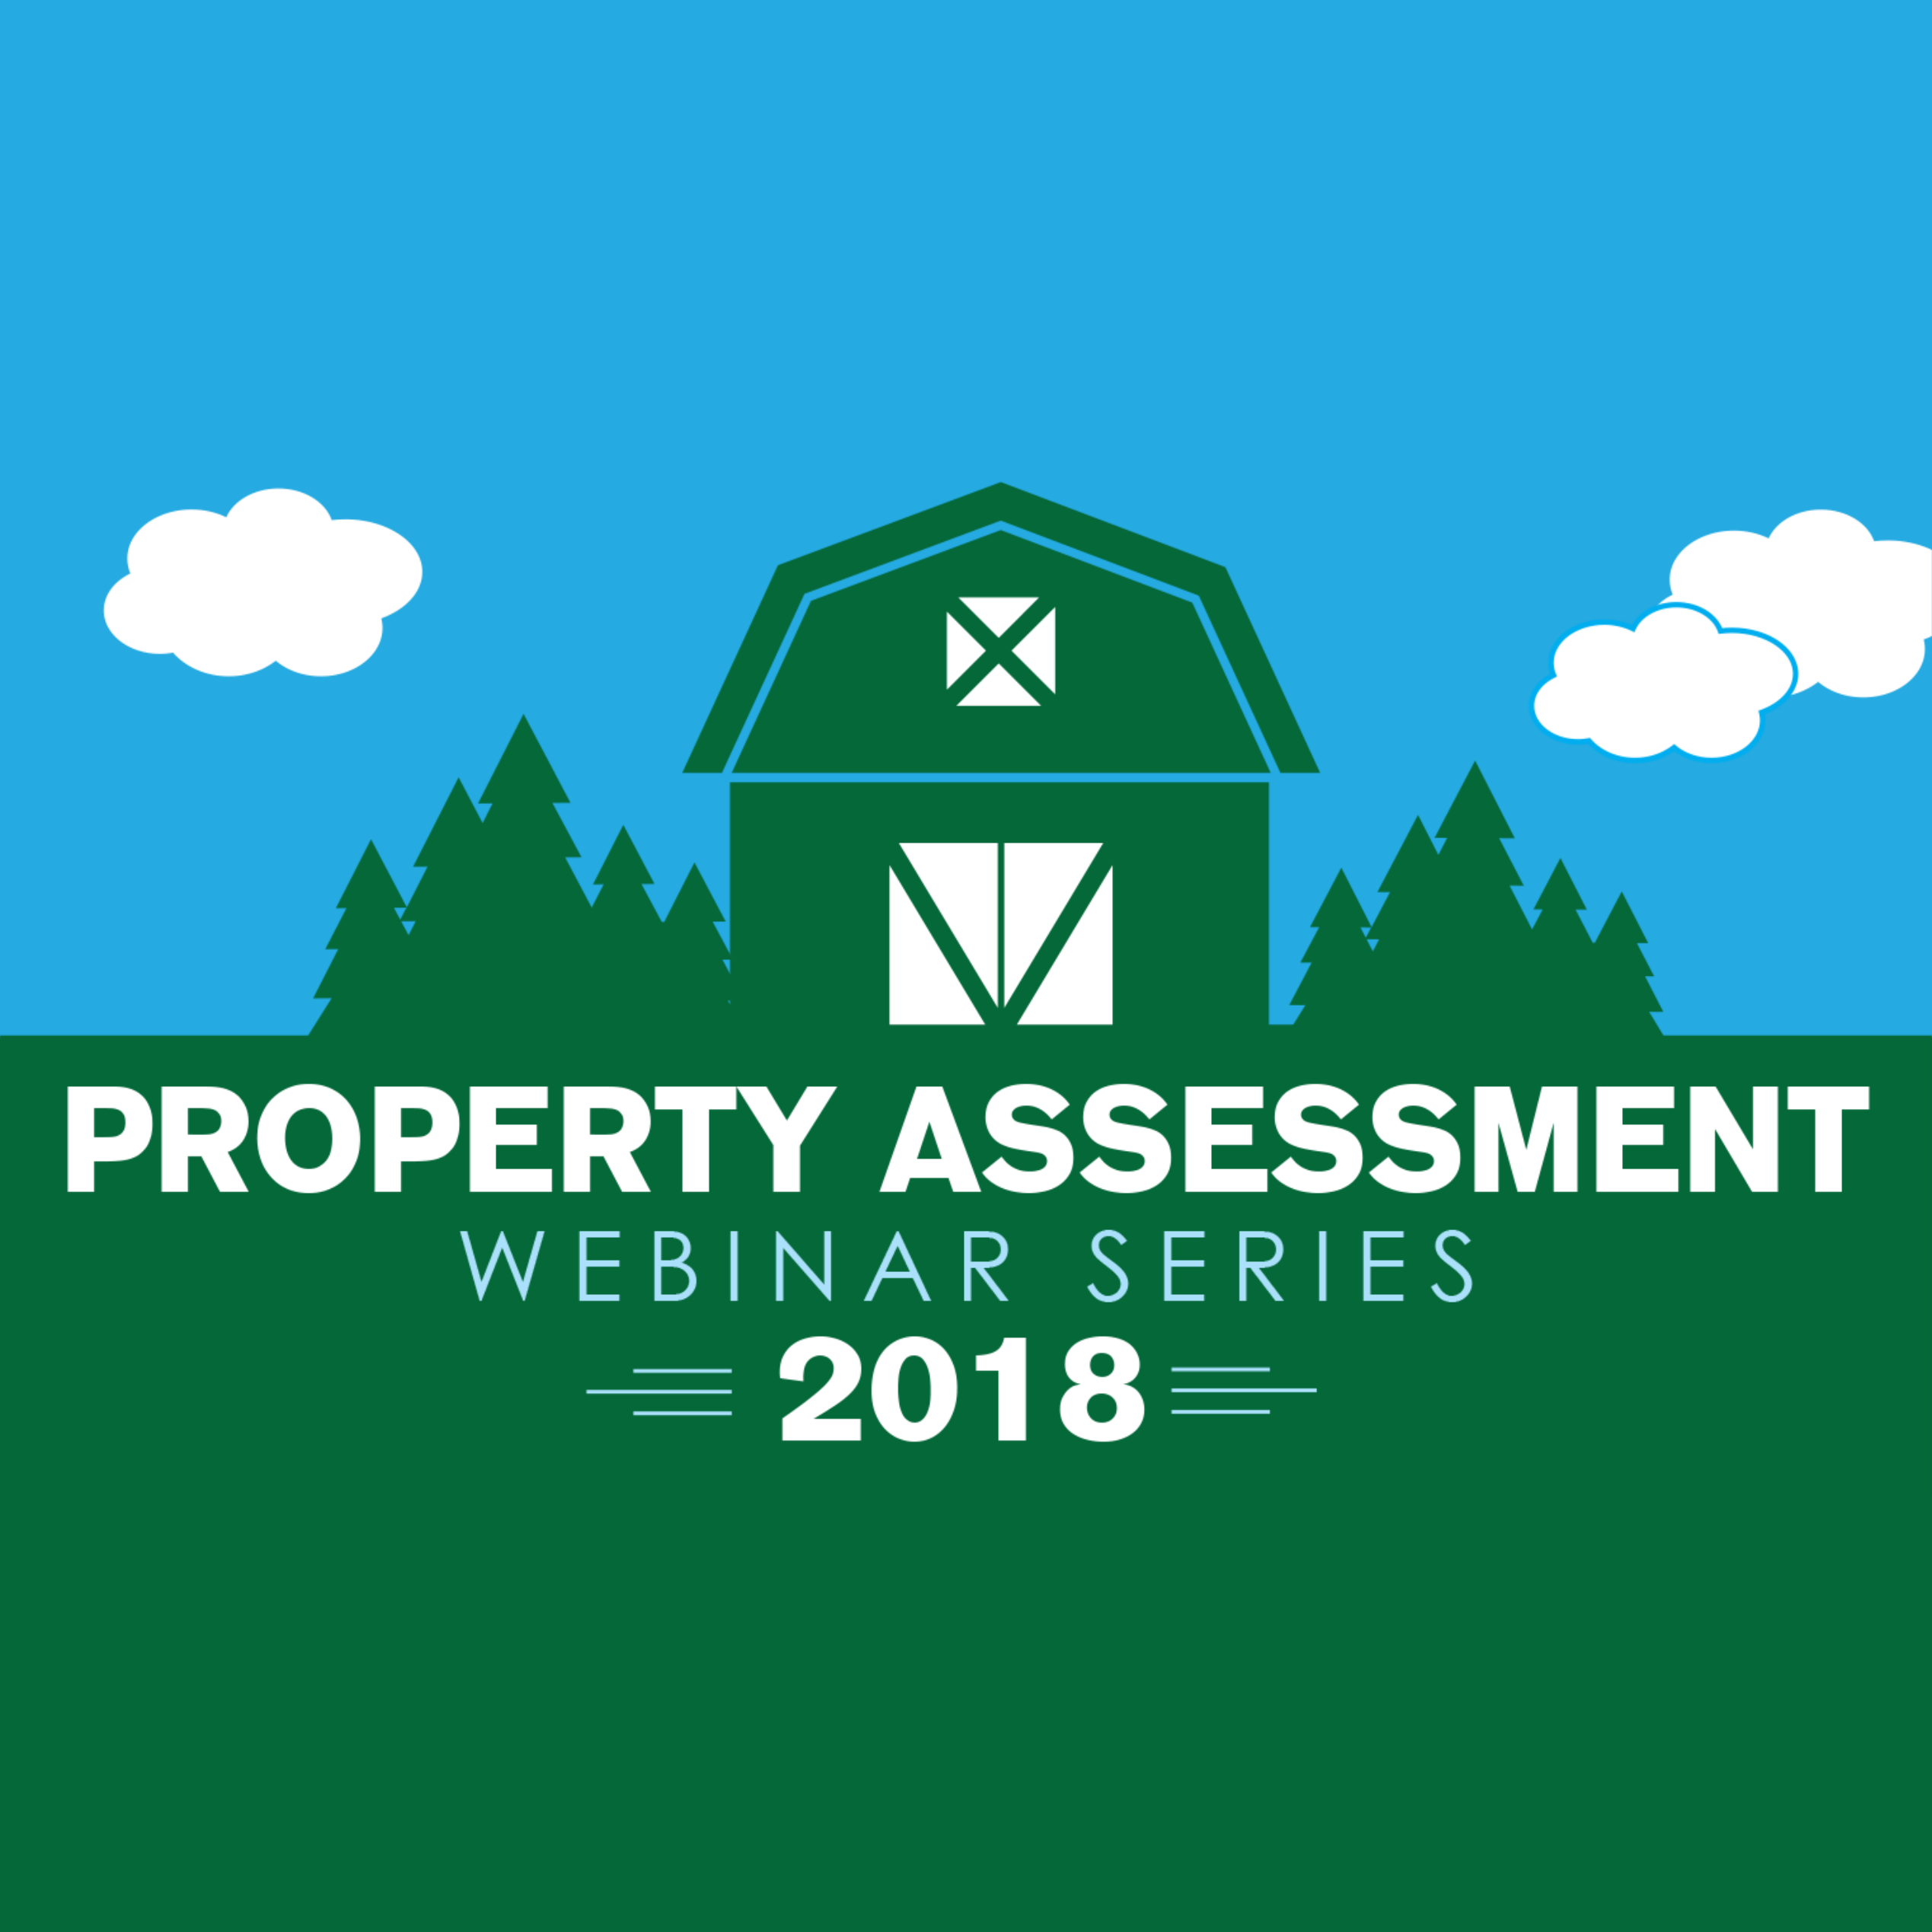 Image of the Arkansas Property Assessments Webinars Logo.  A white barn surrounded by trees with a blue and green backround and the text "Property Assessment Webinar Series".